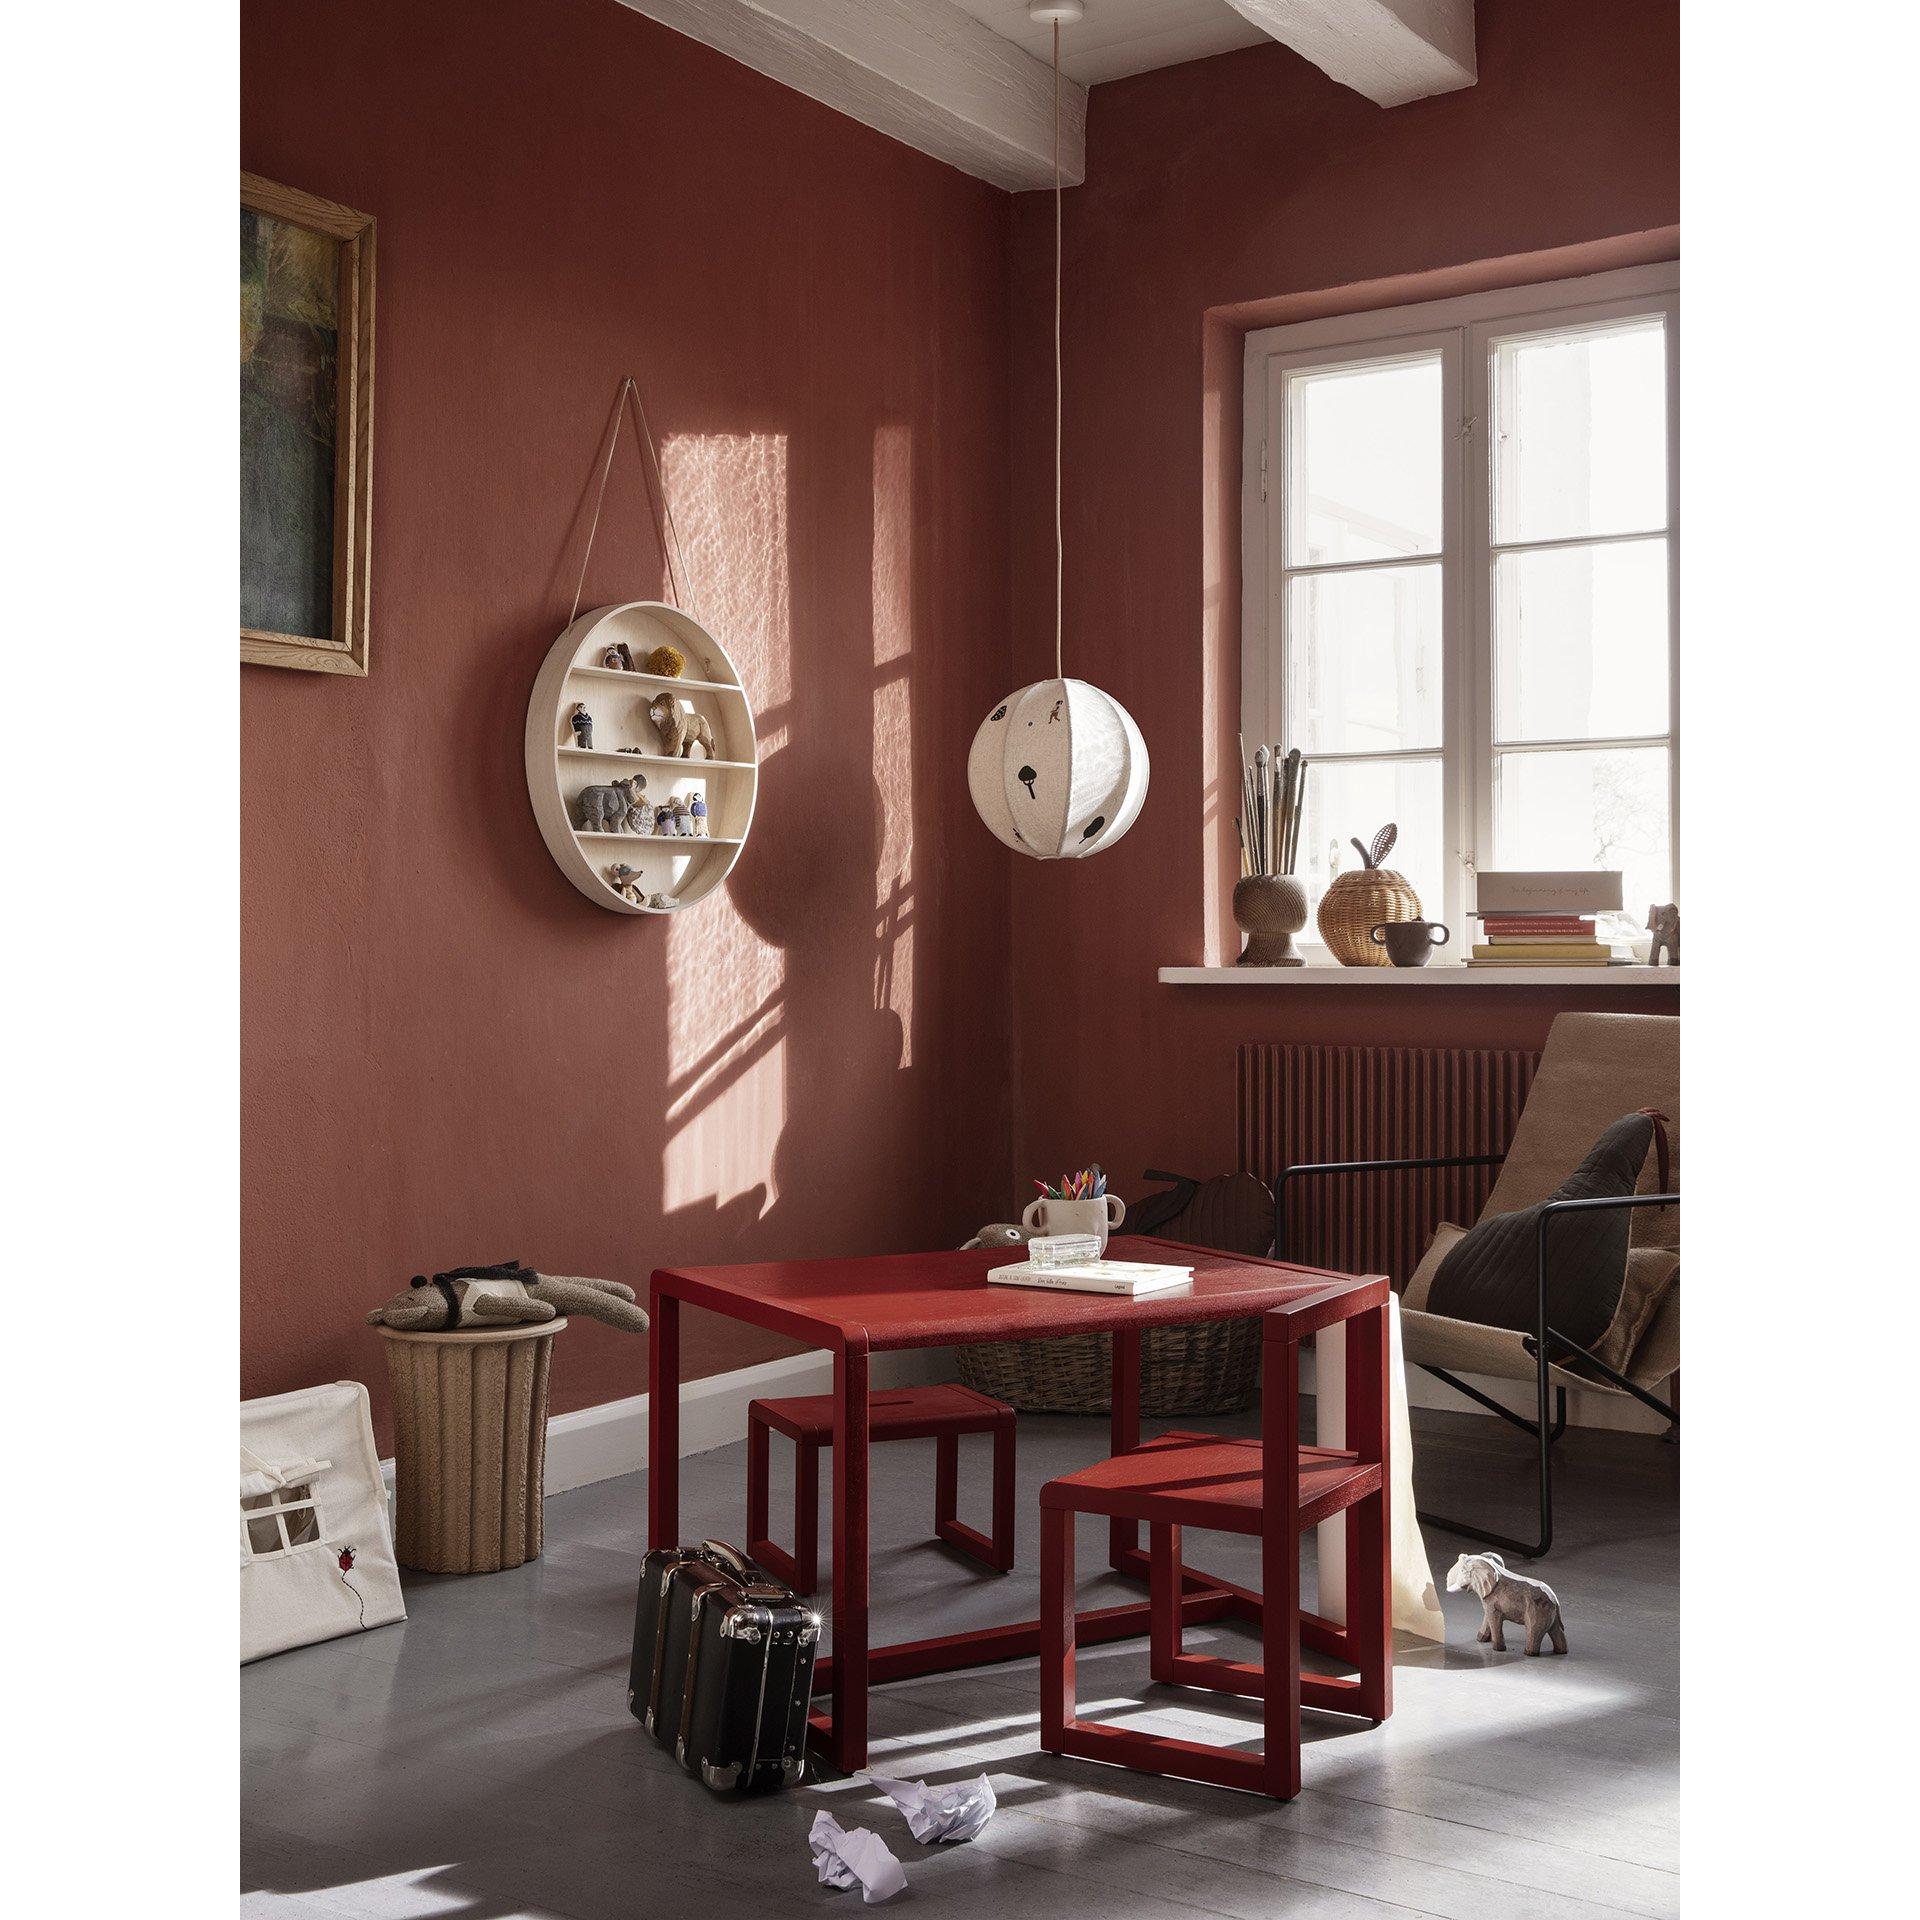 Ferm Living Little Architect椅子，Poppy Red